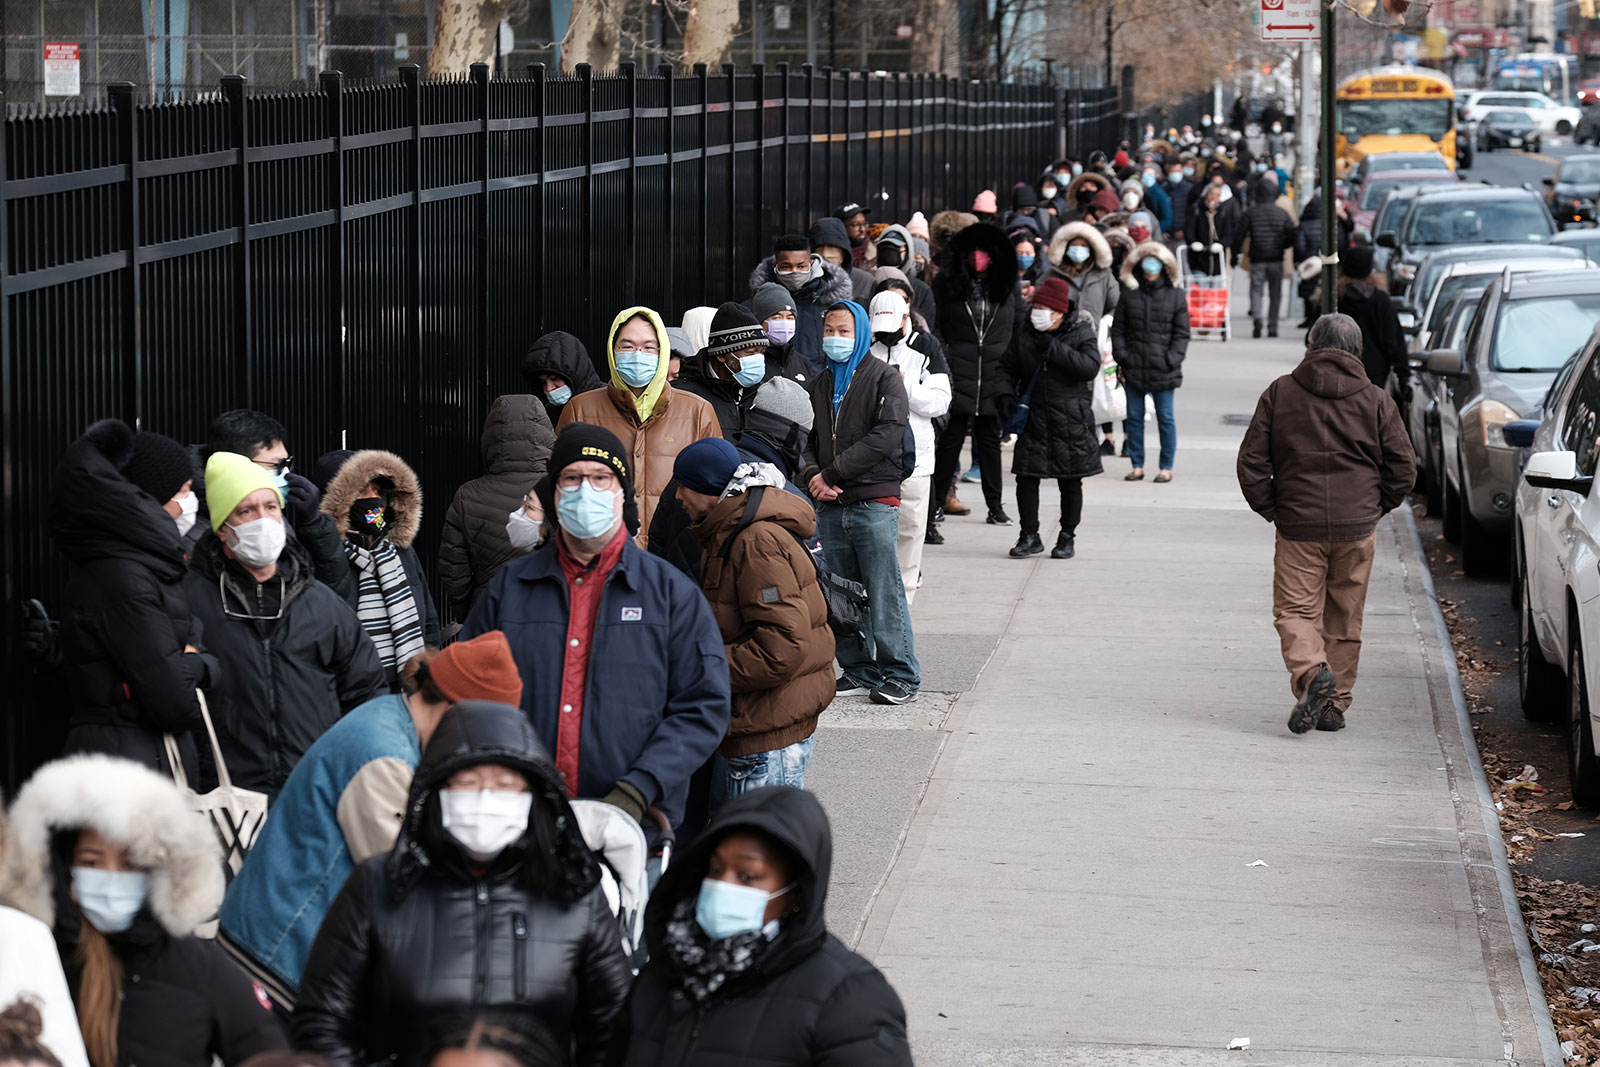 People wait in line for take-home Covid-19 test kits in New York on December 23.